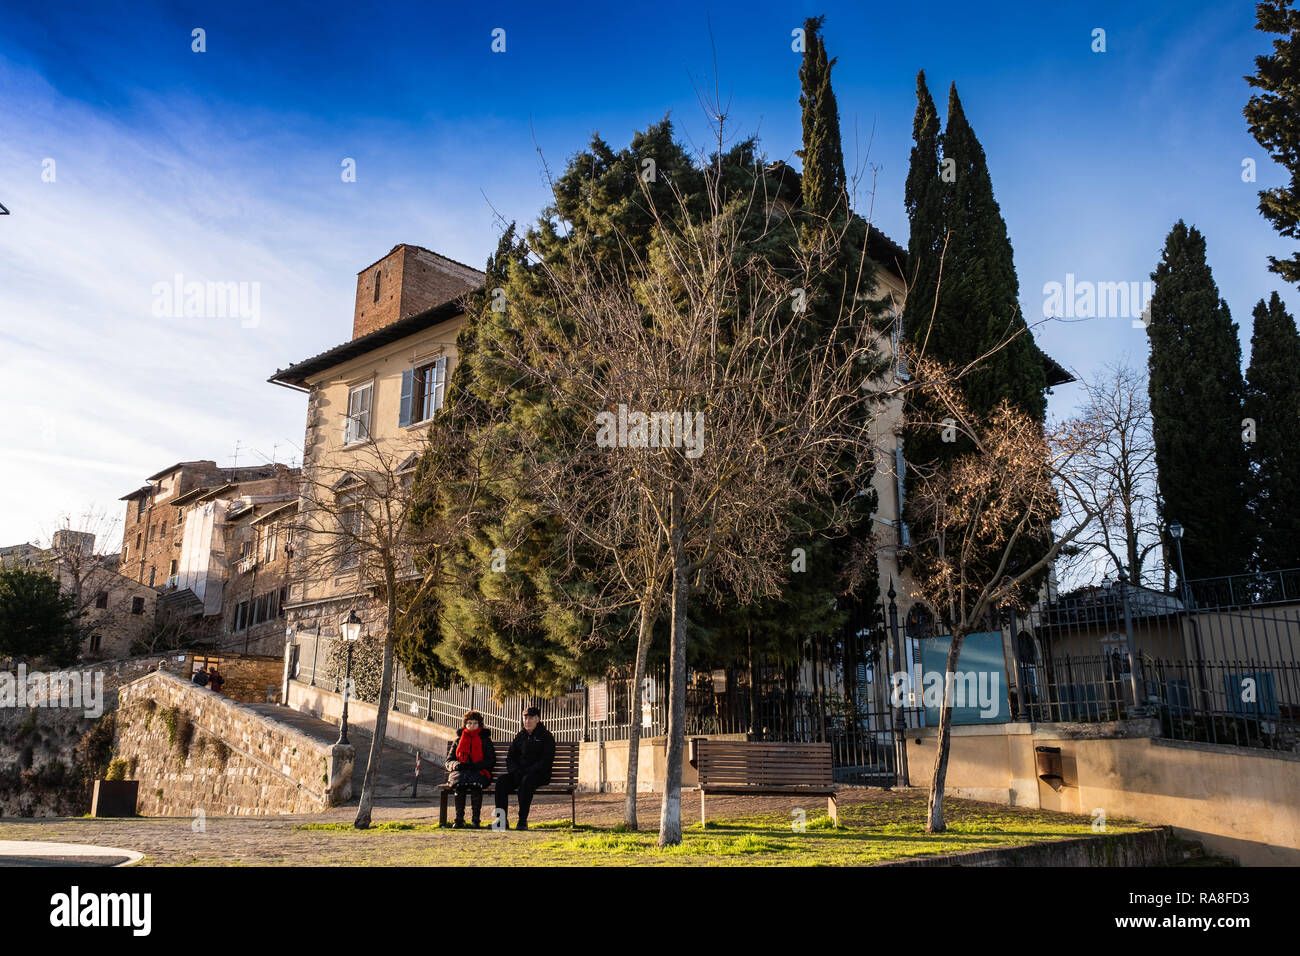 COLLE VAL D’ELSA, ITALY - DECEMBER 26, 2018: Two unknown people in the Baluardi. Panoramic view of the city in the historic center of Colle di Val d'E Stock Photo